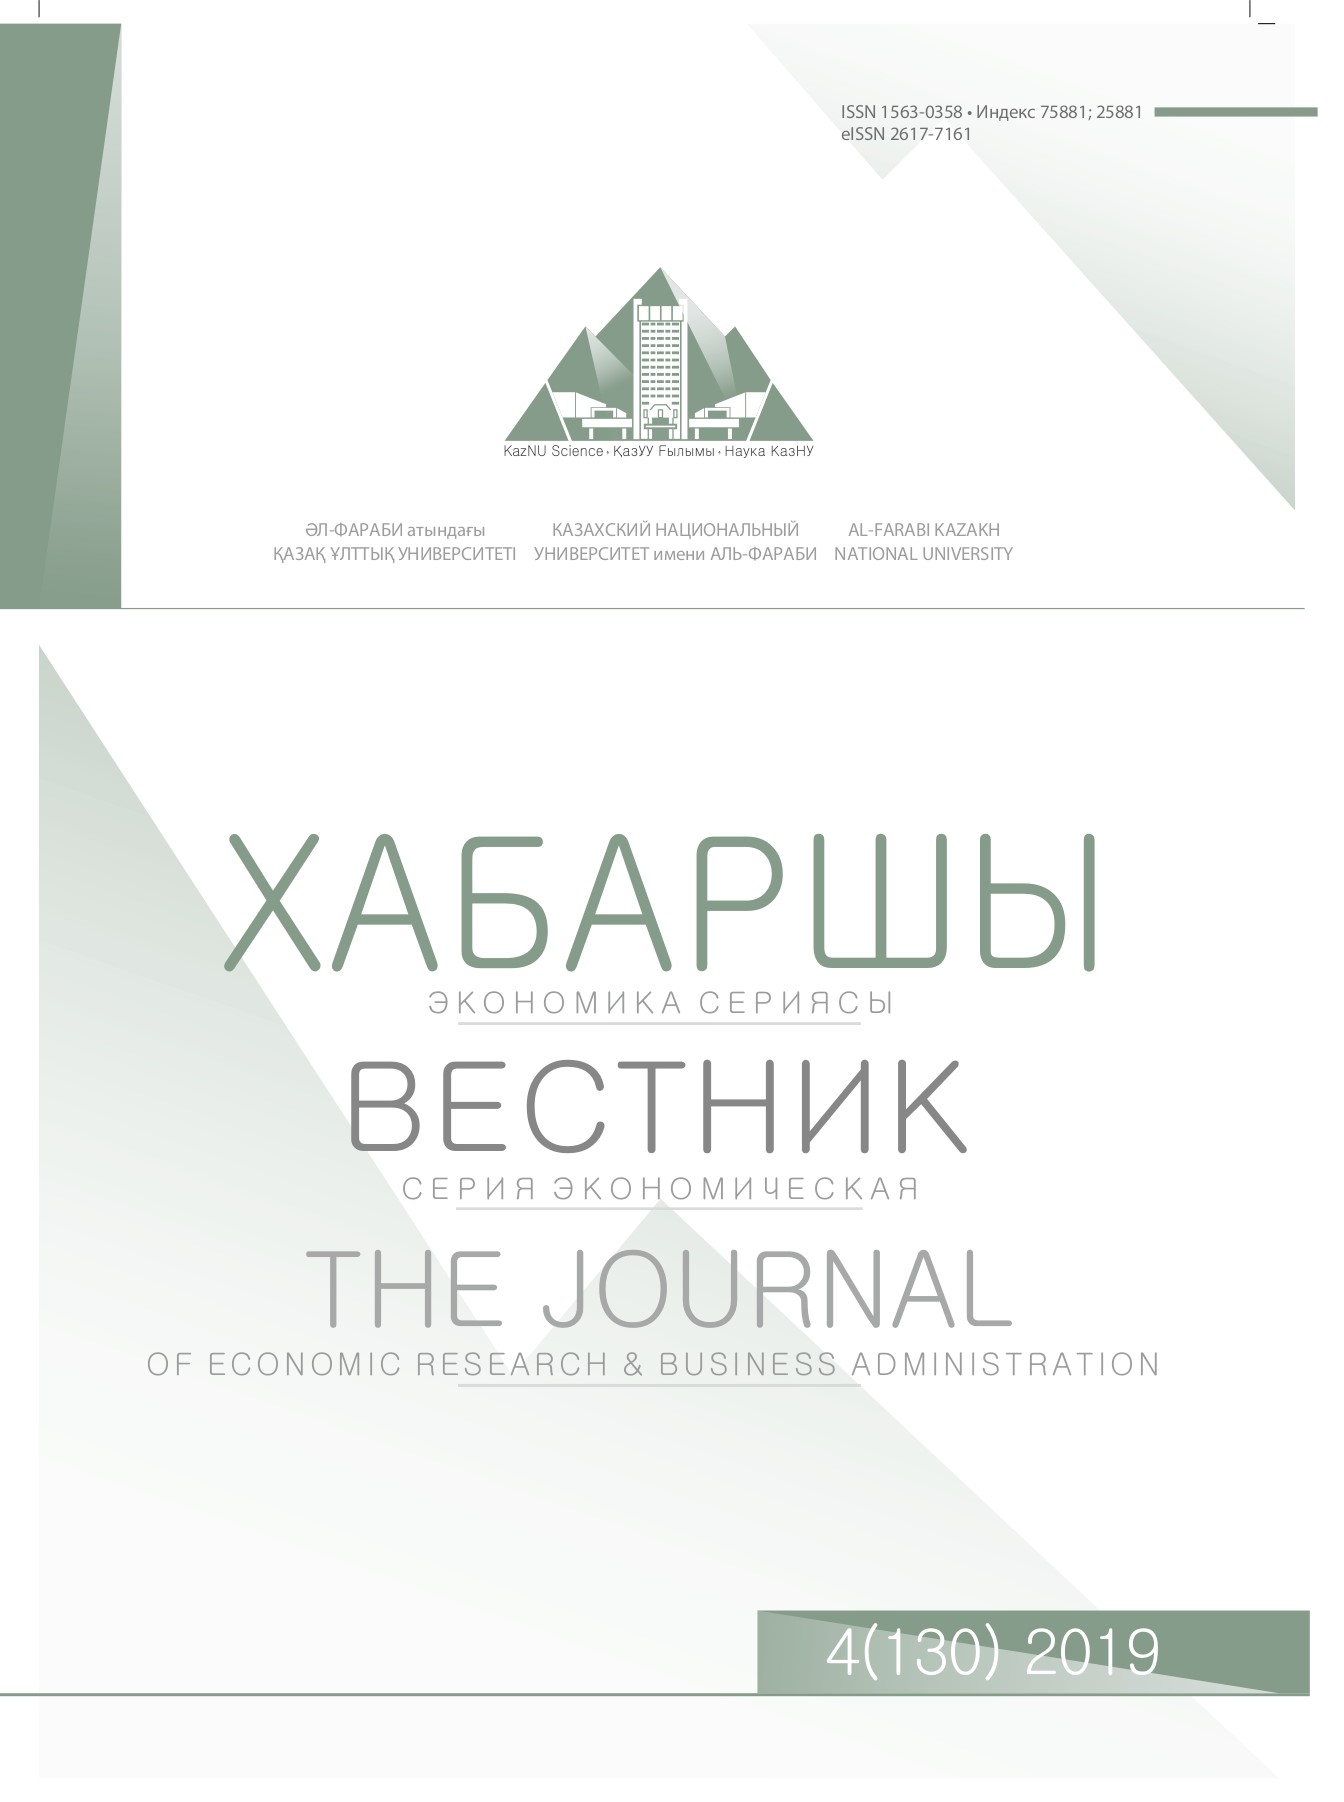 					View Vol. 130 No. 4 (2019): The Journal of Economic Research & Business Administration
				